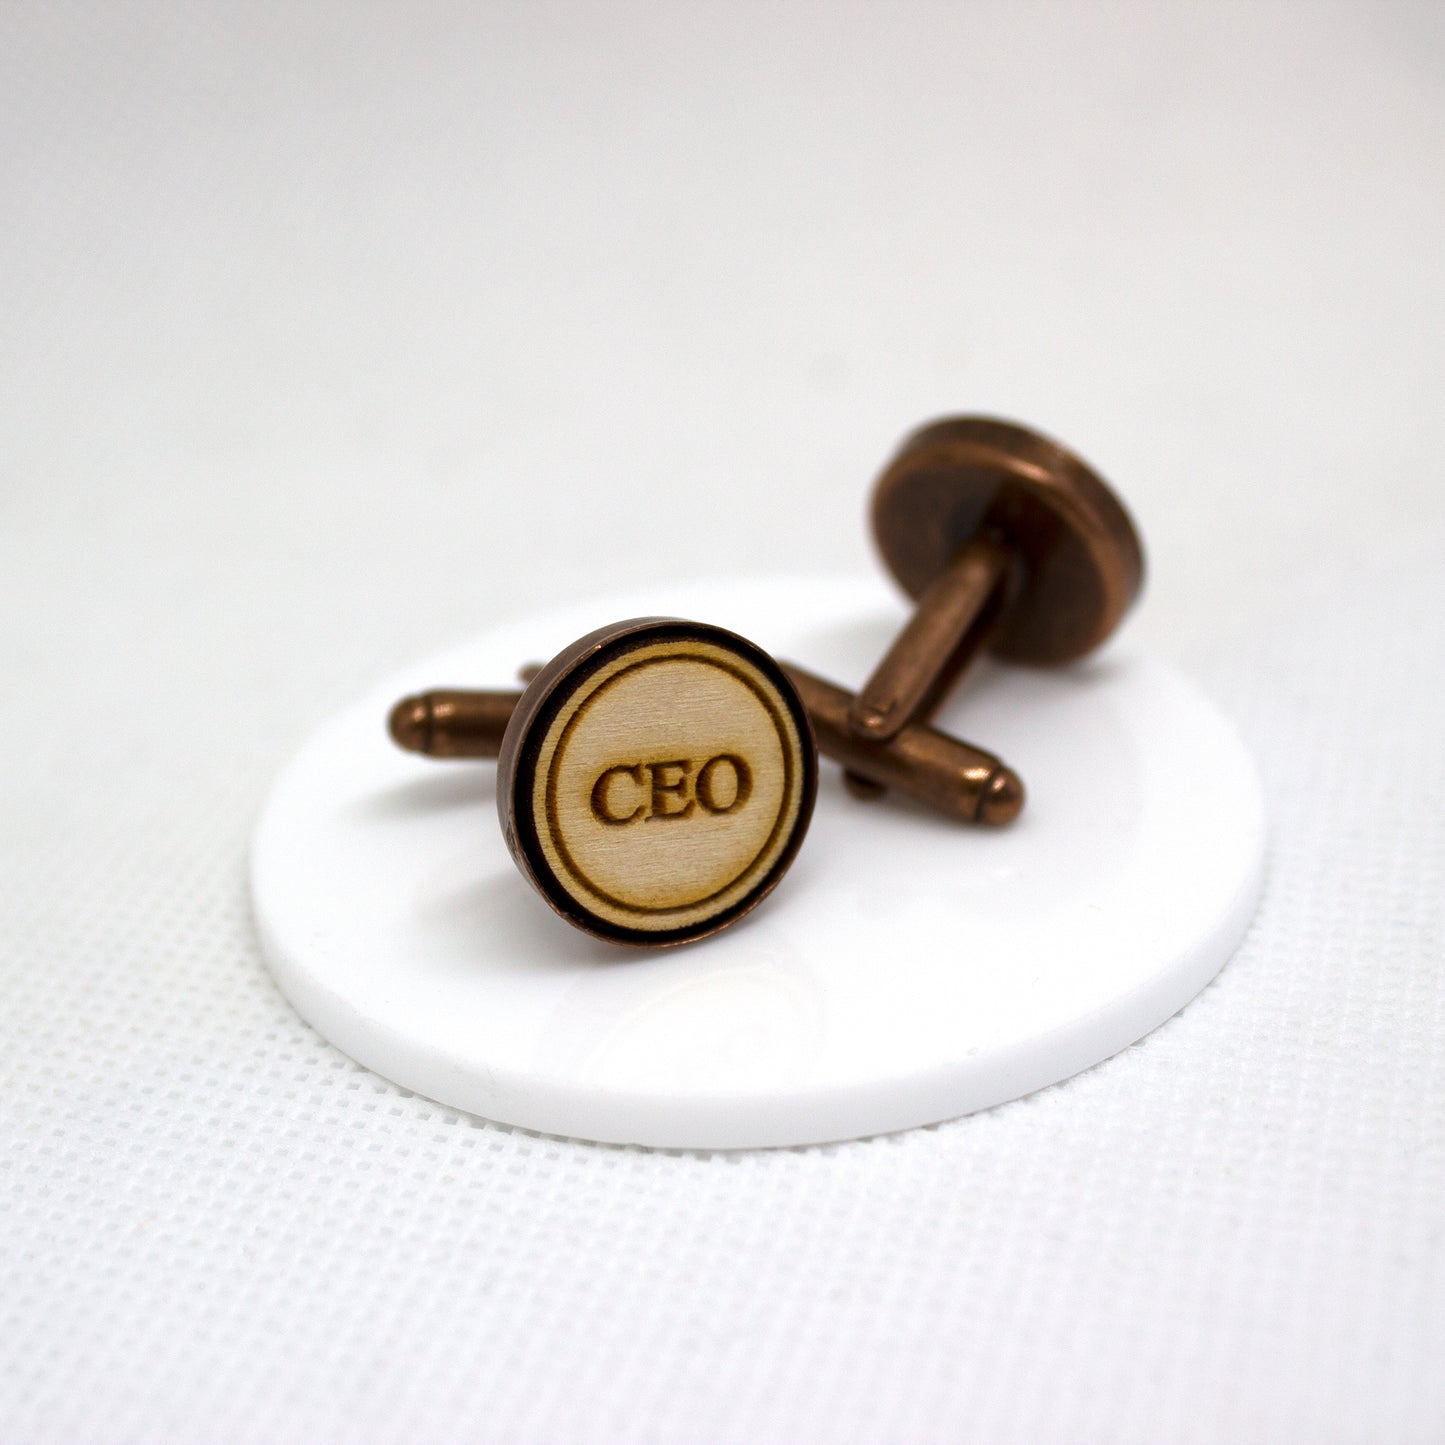 CEO Cufflinks, Father's Day Gifts, Office Gift, Retirement Present